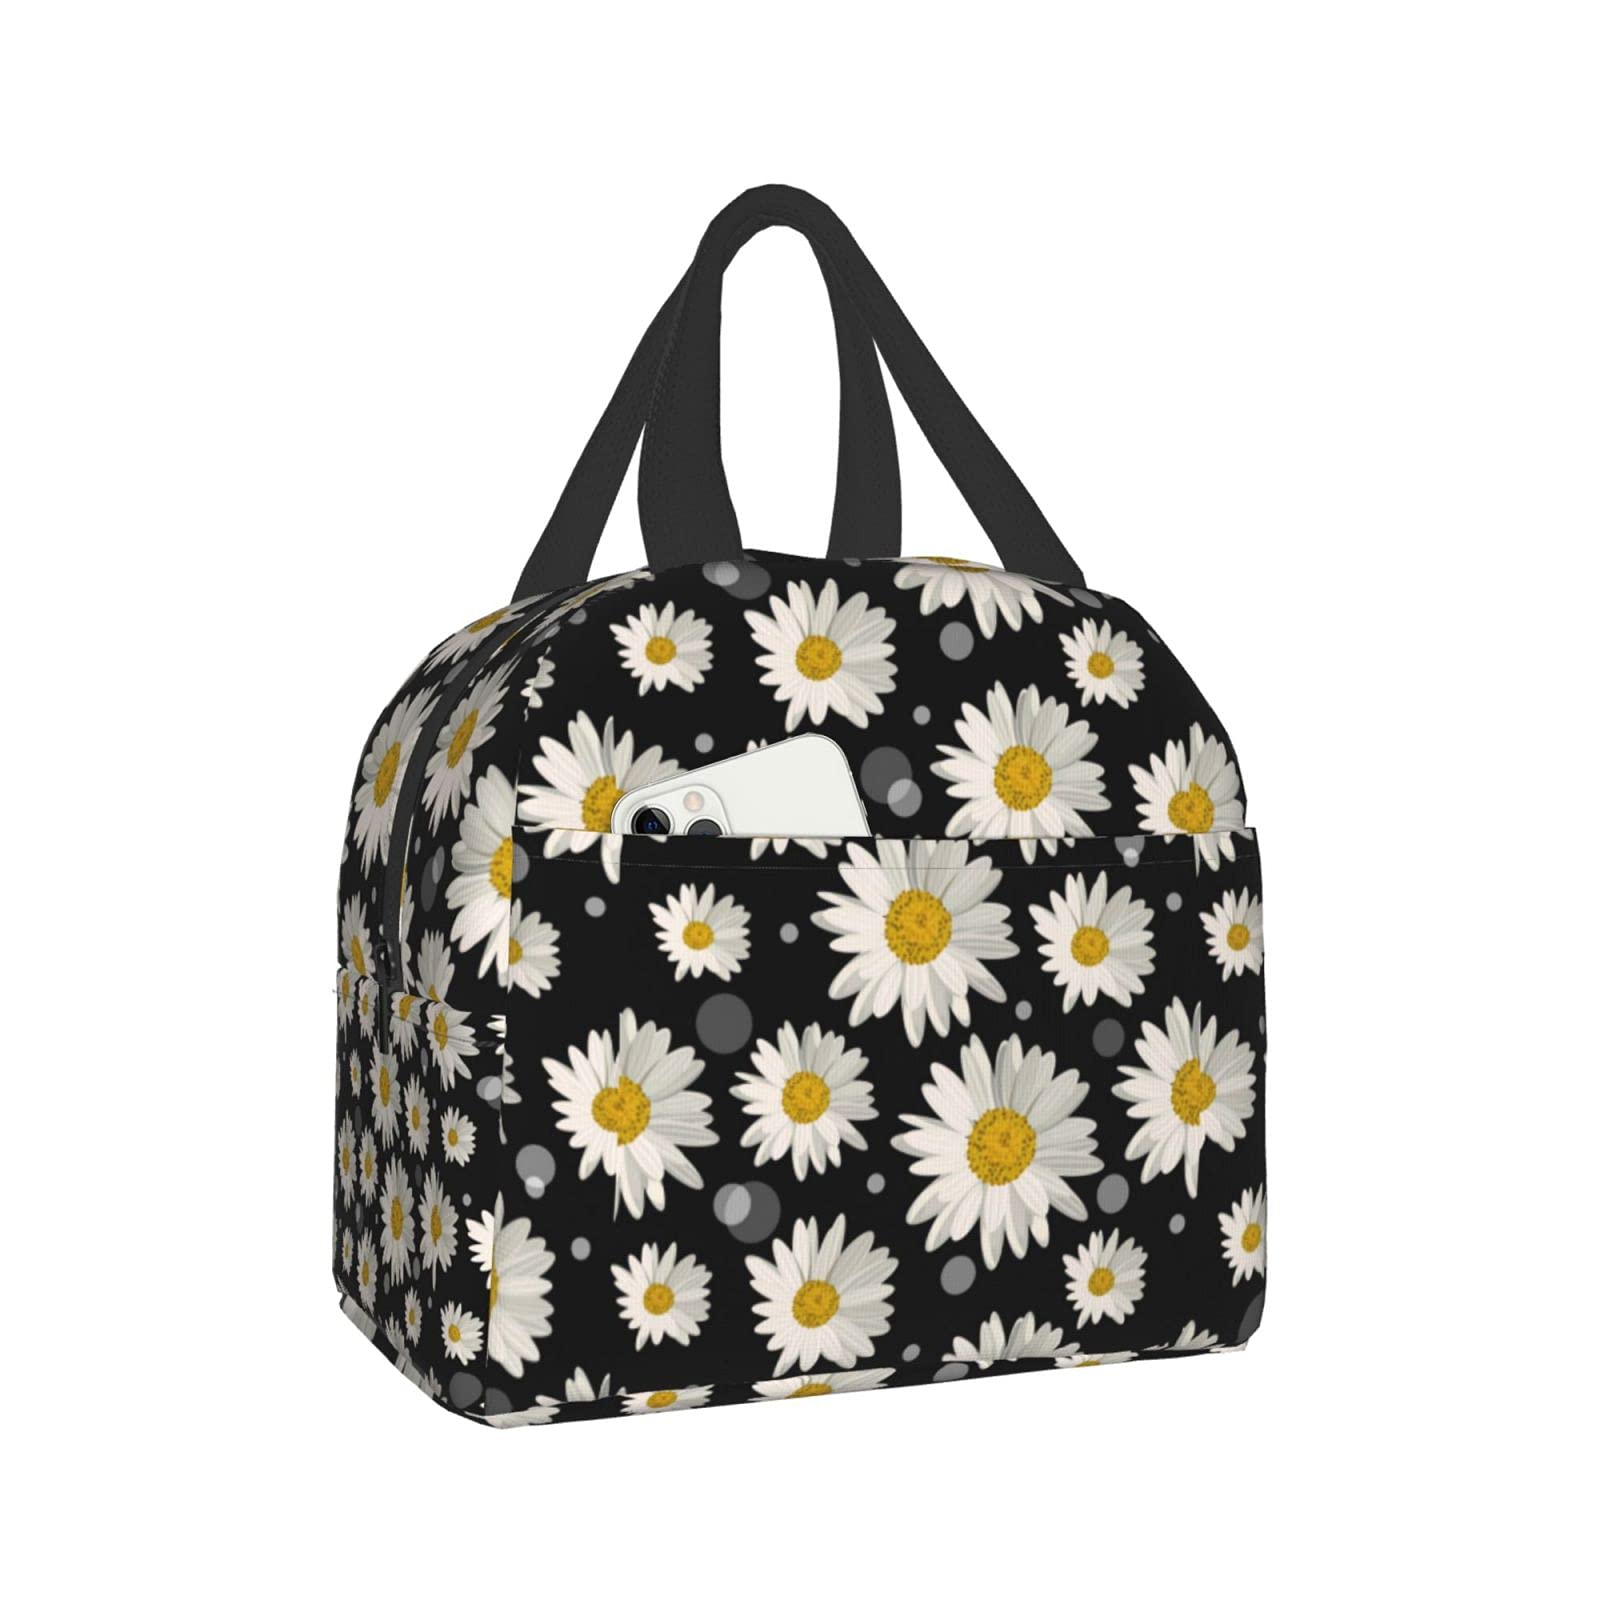 XIAOGUAISHOU White Daisy Flowers lunch Bag Insulated Cooler Tote Bags Box Reusable Meal Container for Women Office Picnic Work Beach One Size